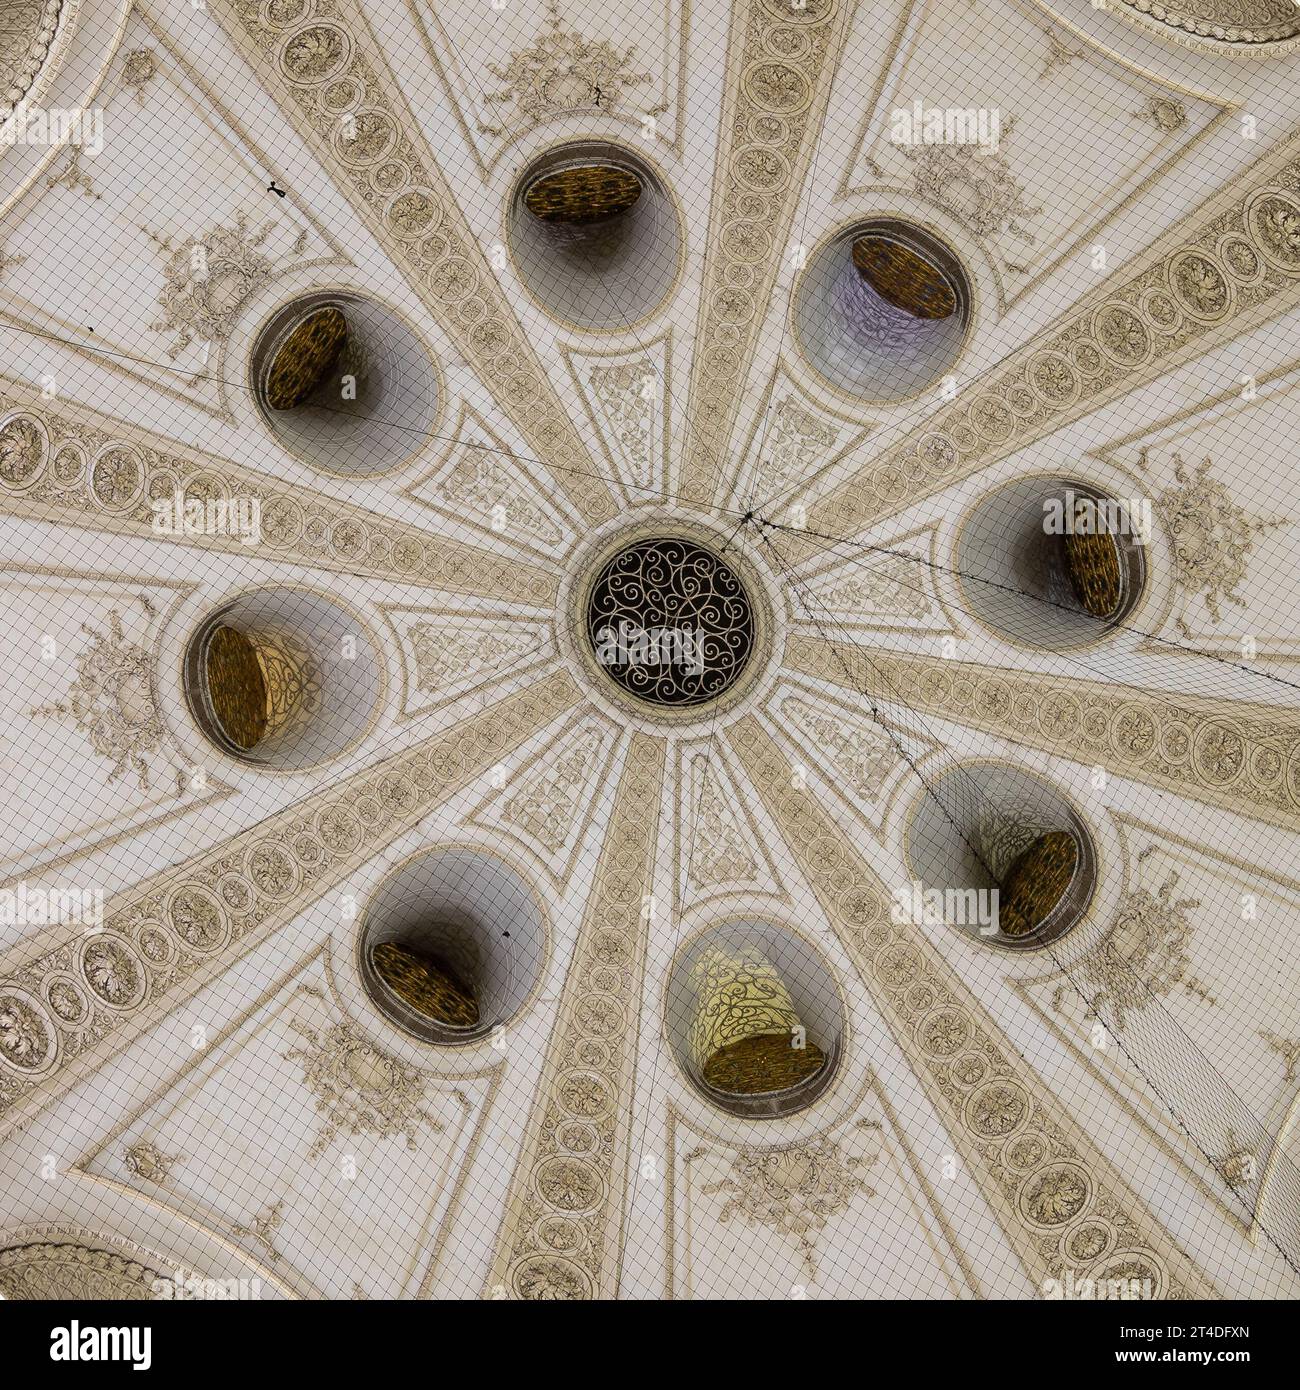 Looking up to the inside of the dome of the St Michaels's wing in the hofburg palace which is wonderfully decorated with old drawings dating back 1918 Stock Photo